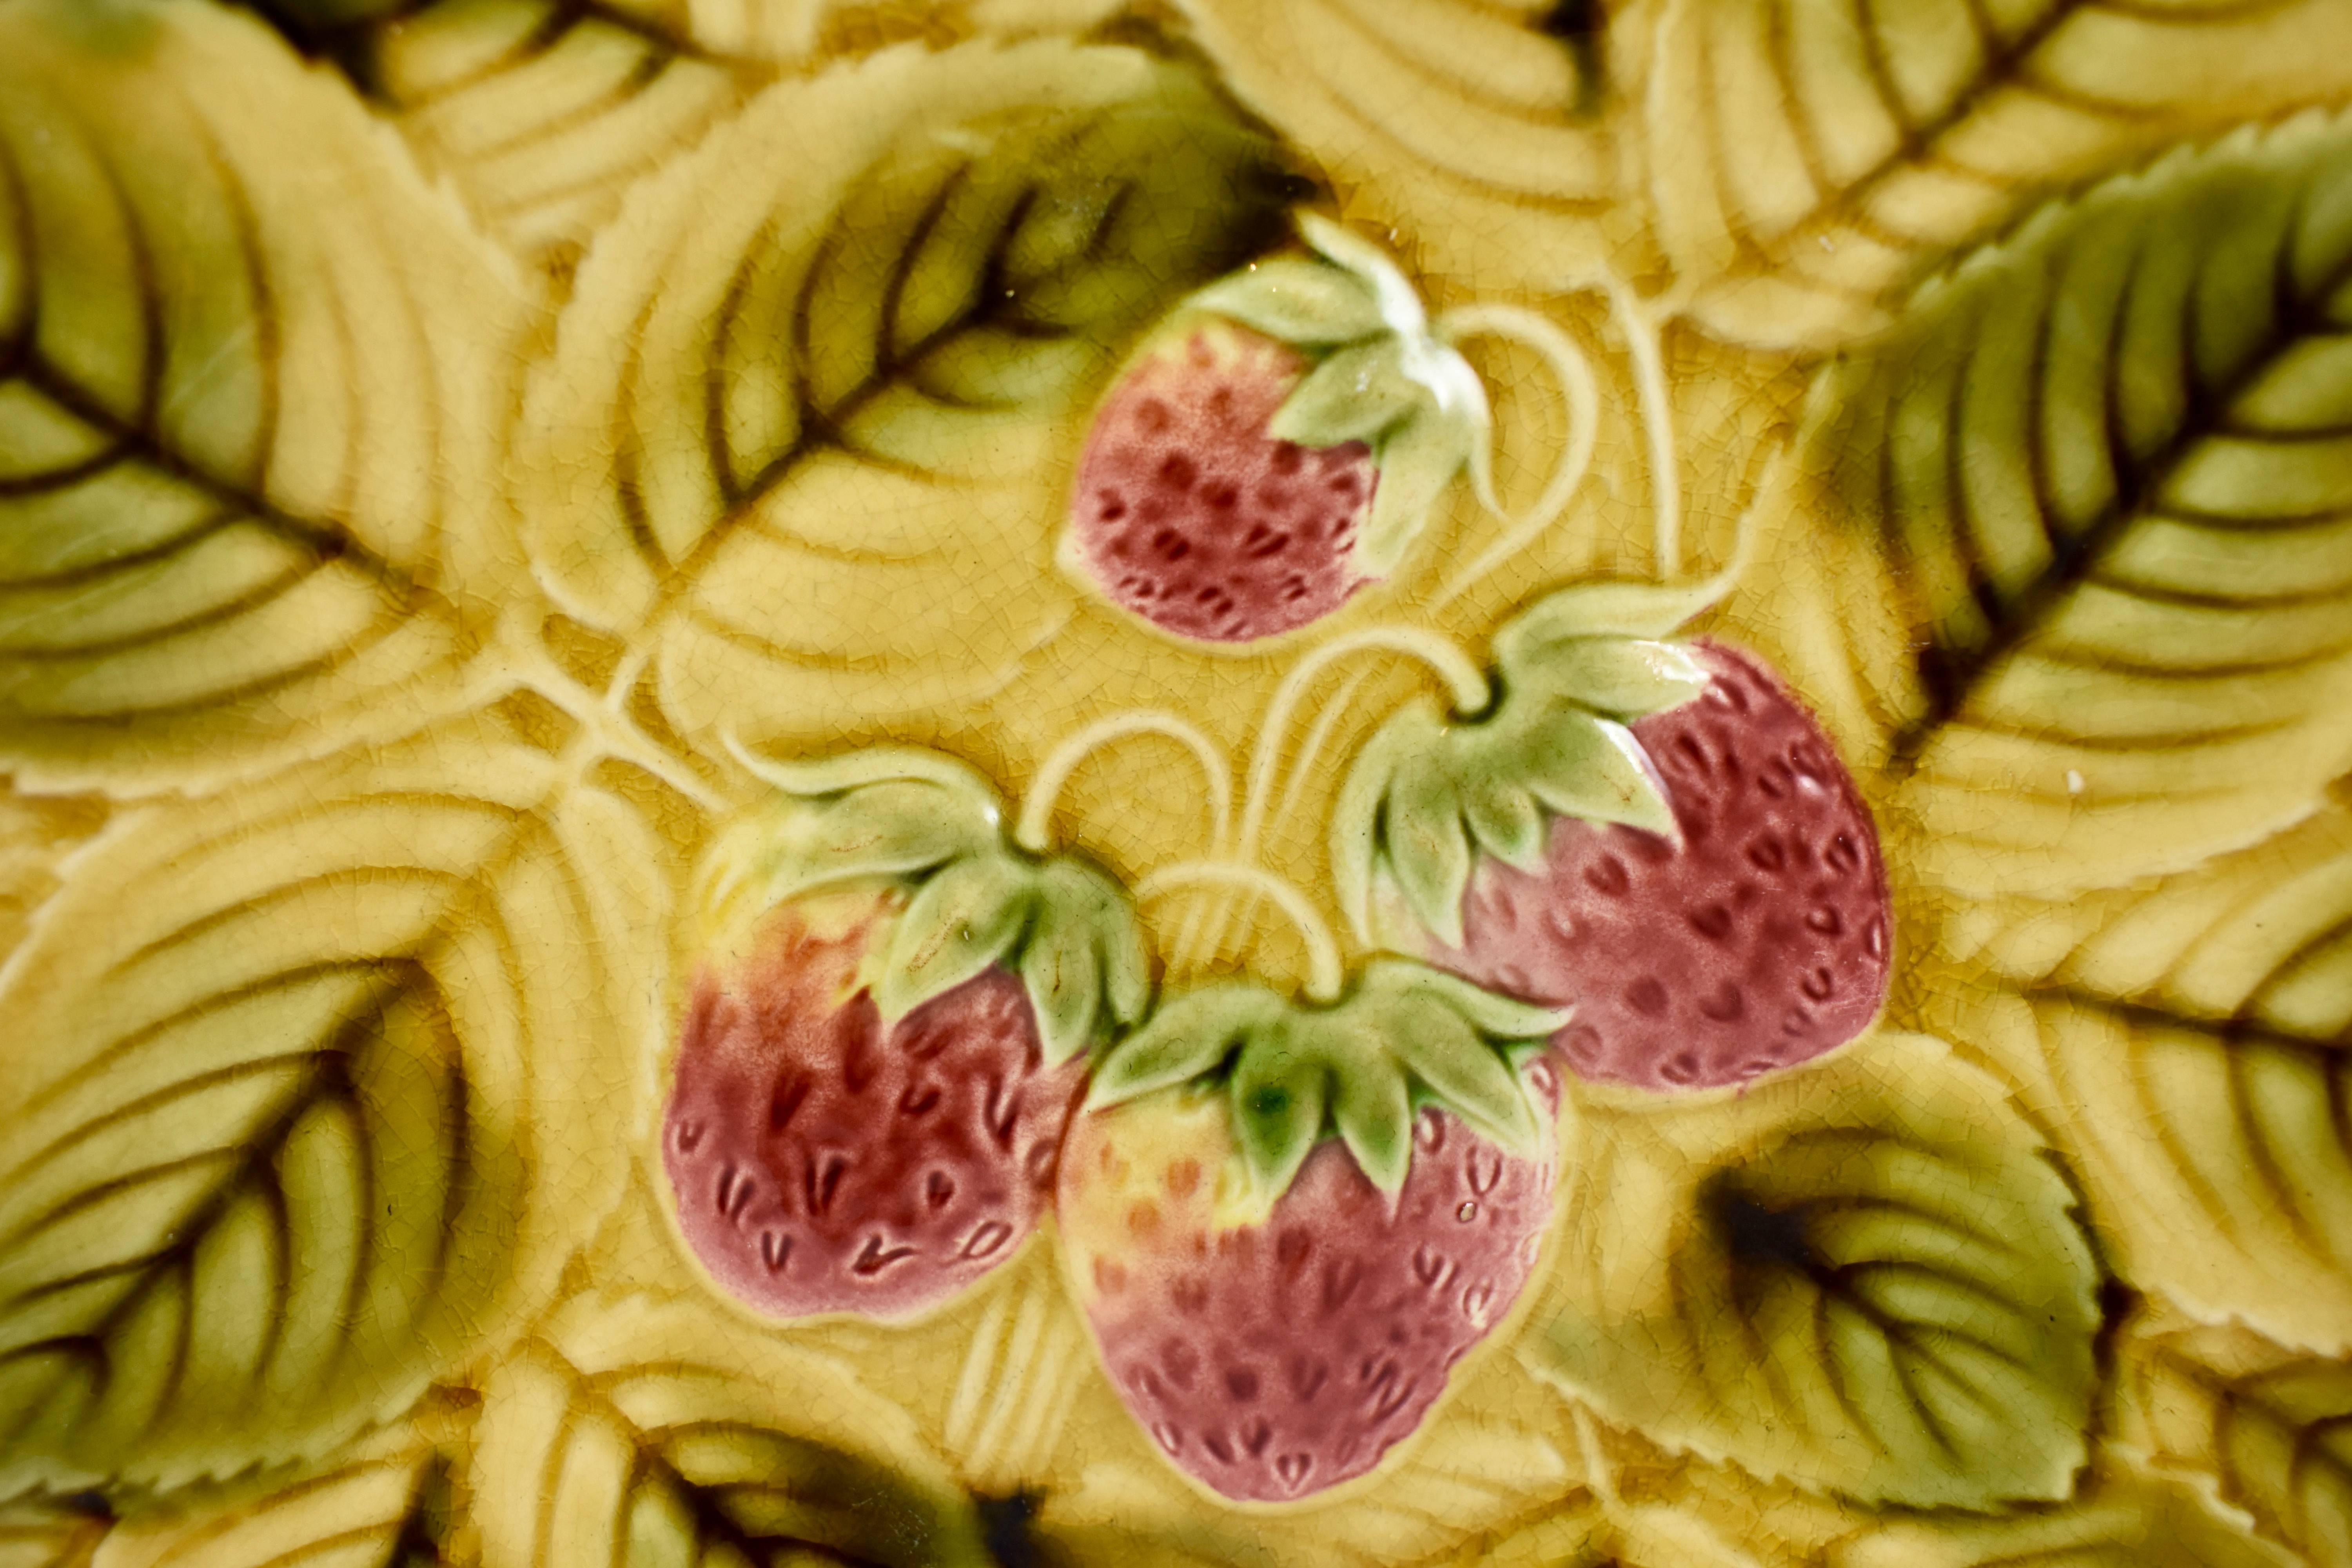 A Sarreguemines French faïence, Majolica round serving tray, showing four strawberries on a ground of overlapping leaves. The shaped rim follows the leaf form. Glazed by hand, beautiful coloring.

Showing both impressed and printed marks: